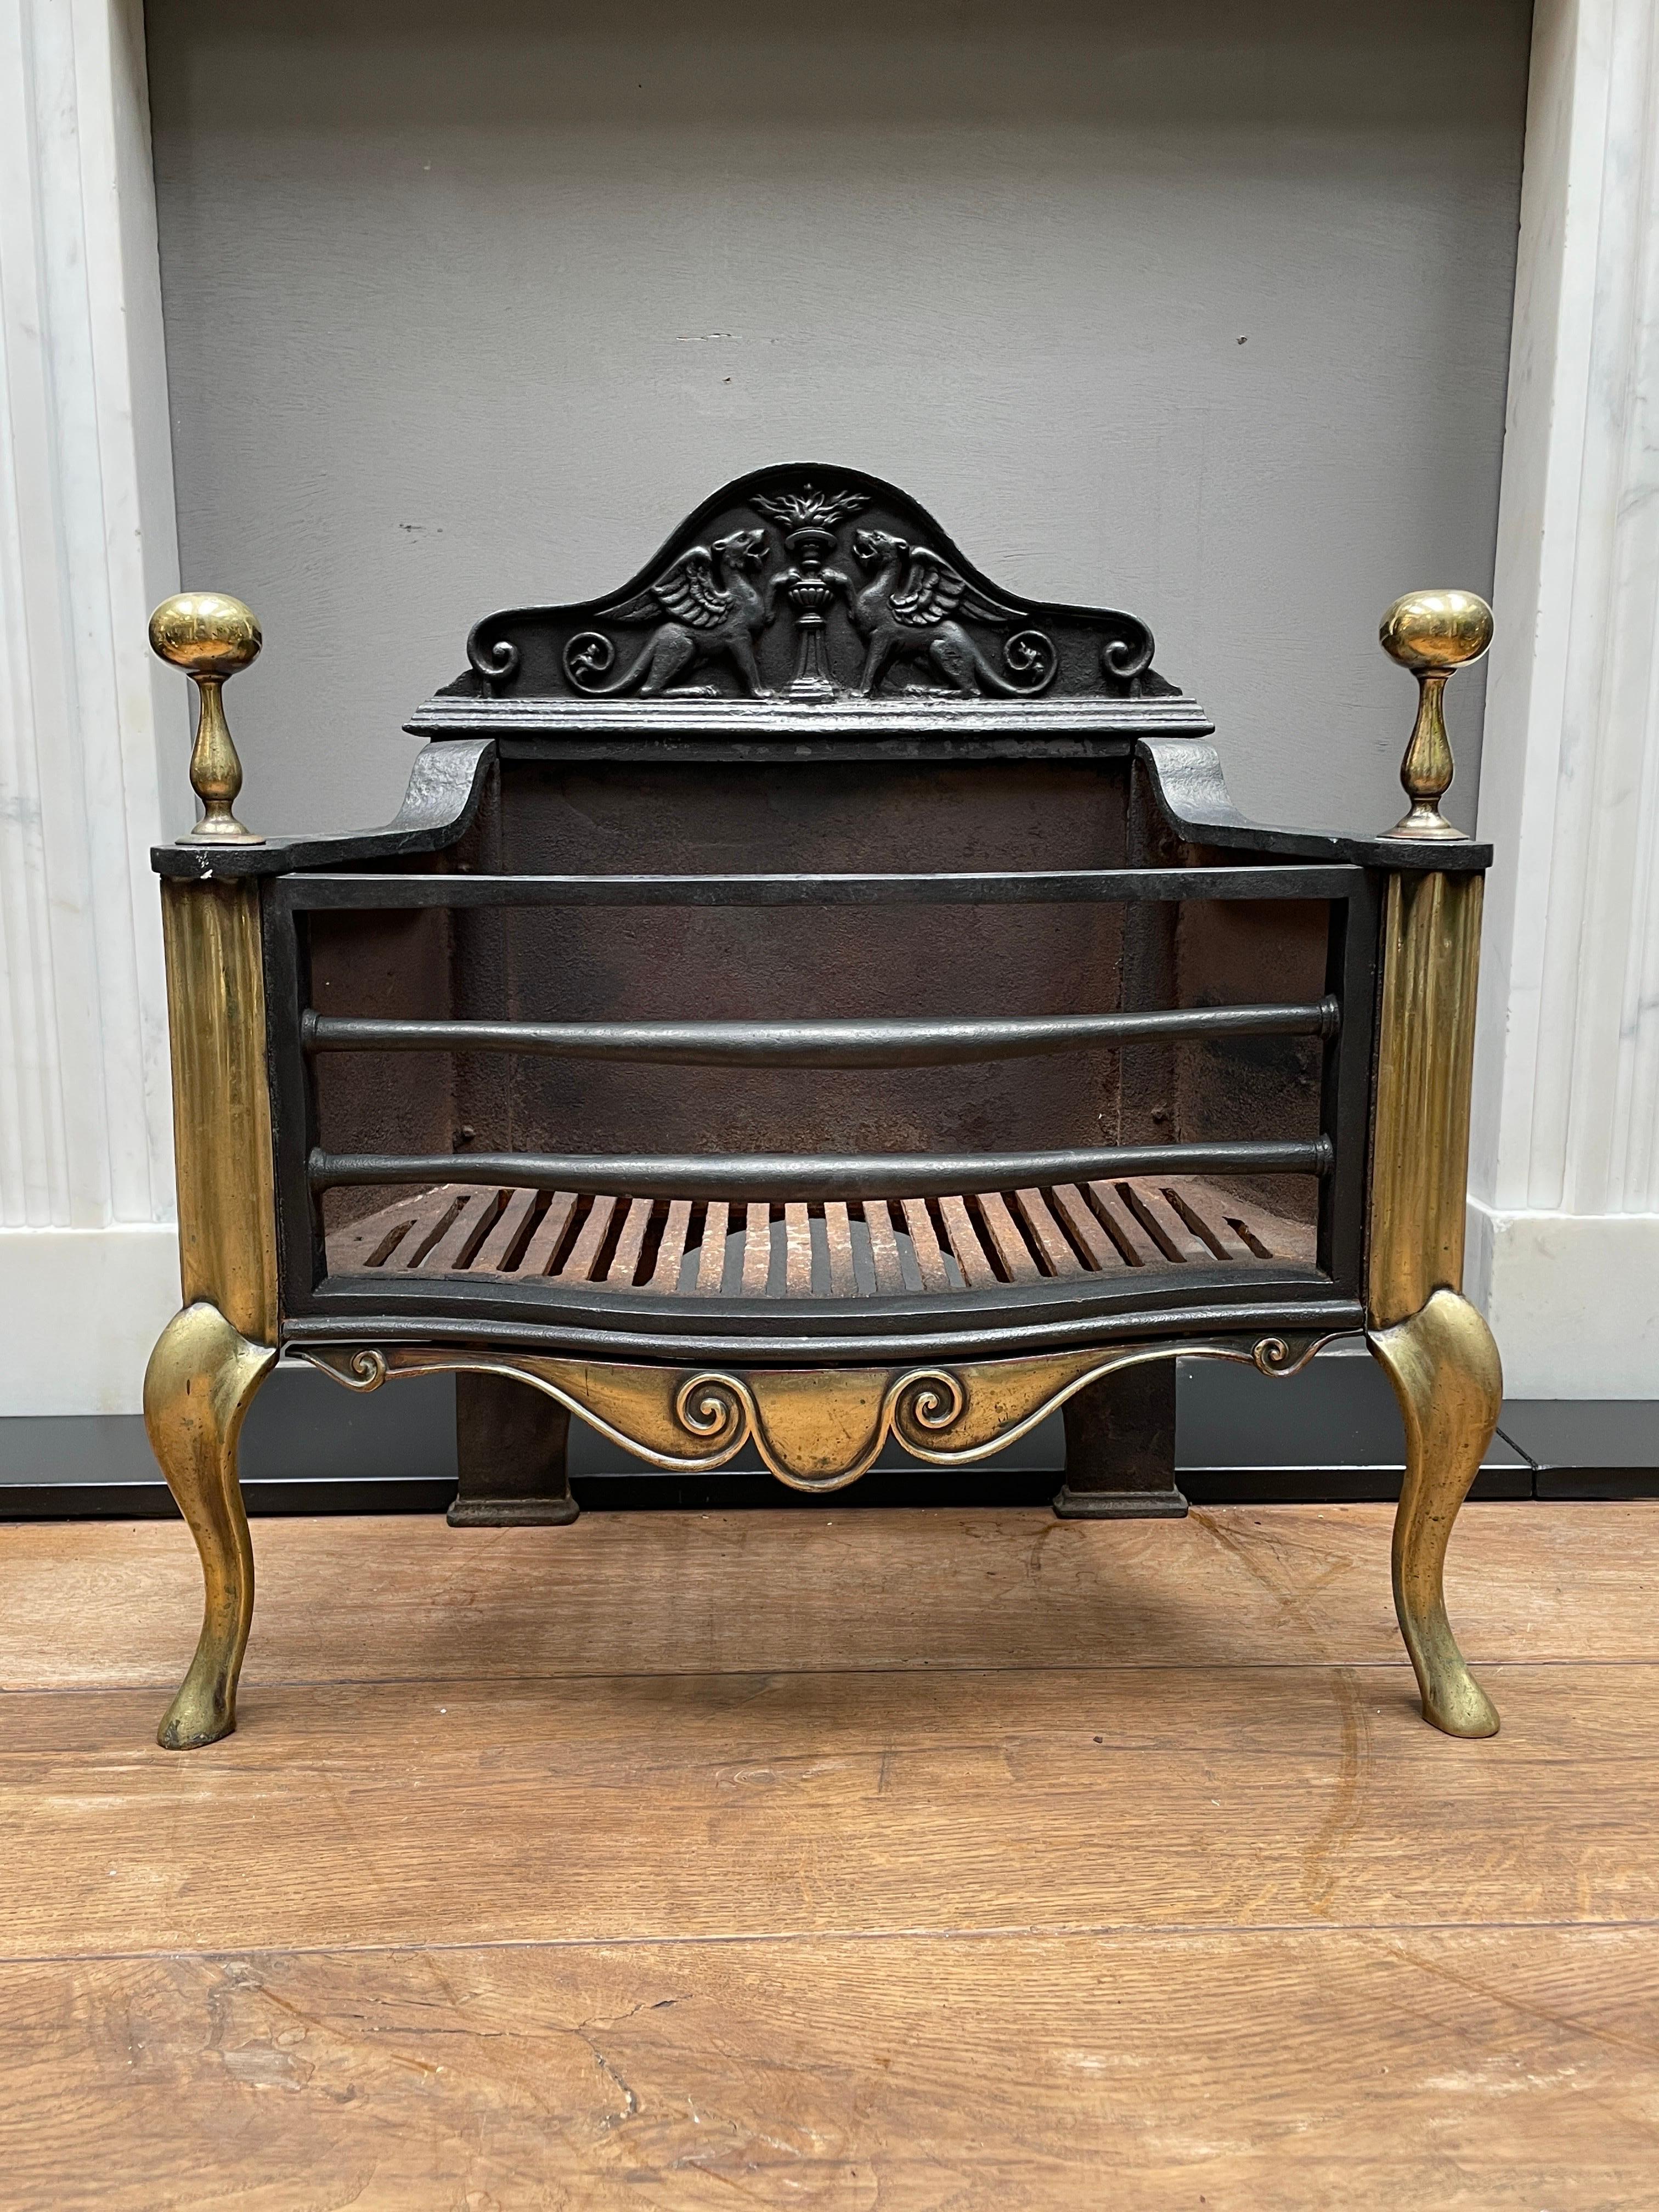 A Queen Anne style fire grate by renowned Foundry Thomas Elsley, circa 1860.
A very good quality grate in brass and cast iron. The cabriole legs, bulbas finials and scrolled apron in brass. The decorative fire back with opposing Griffins. 
Stamped